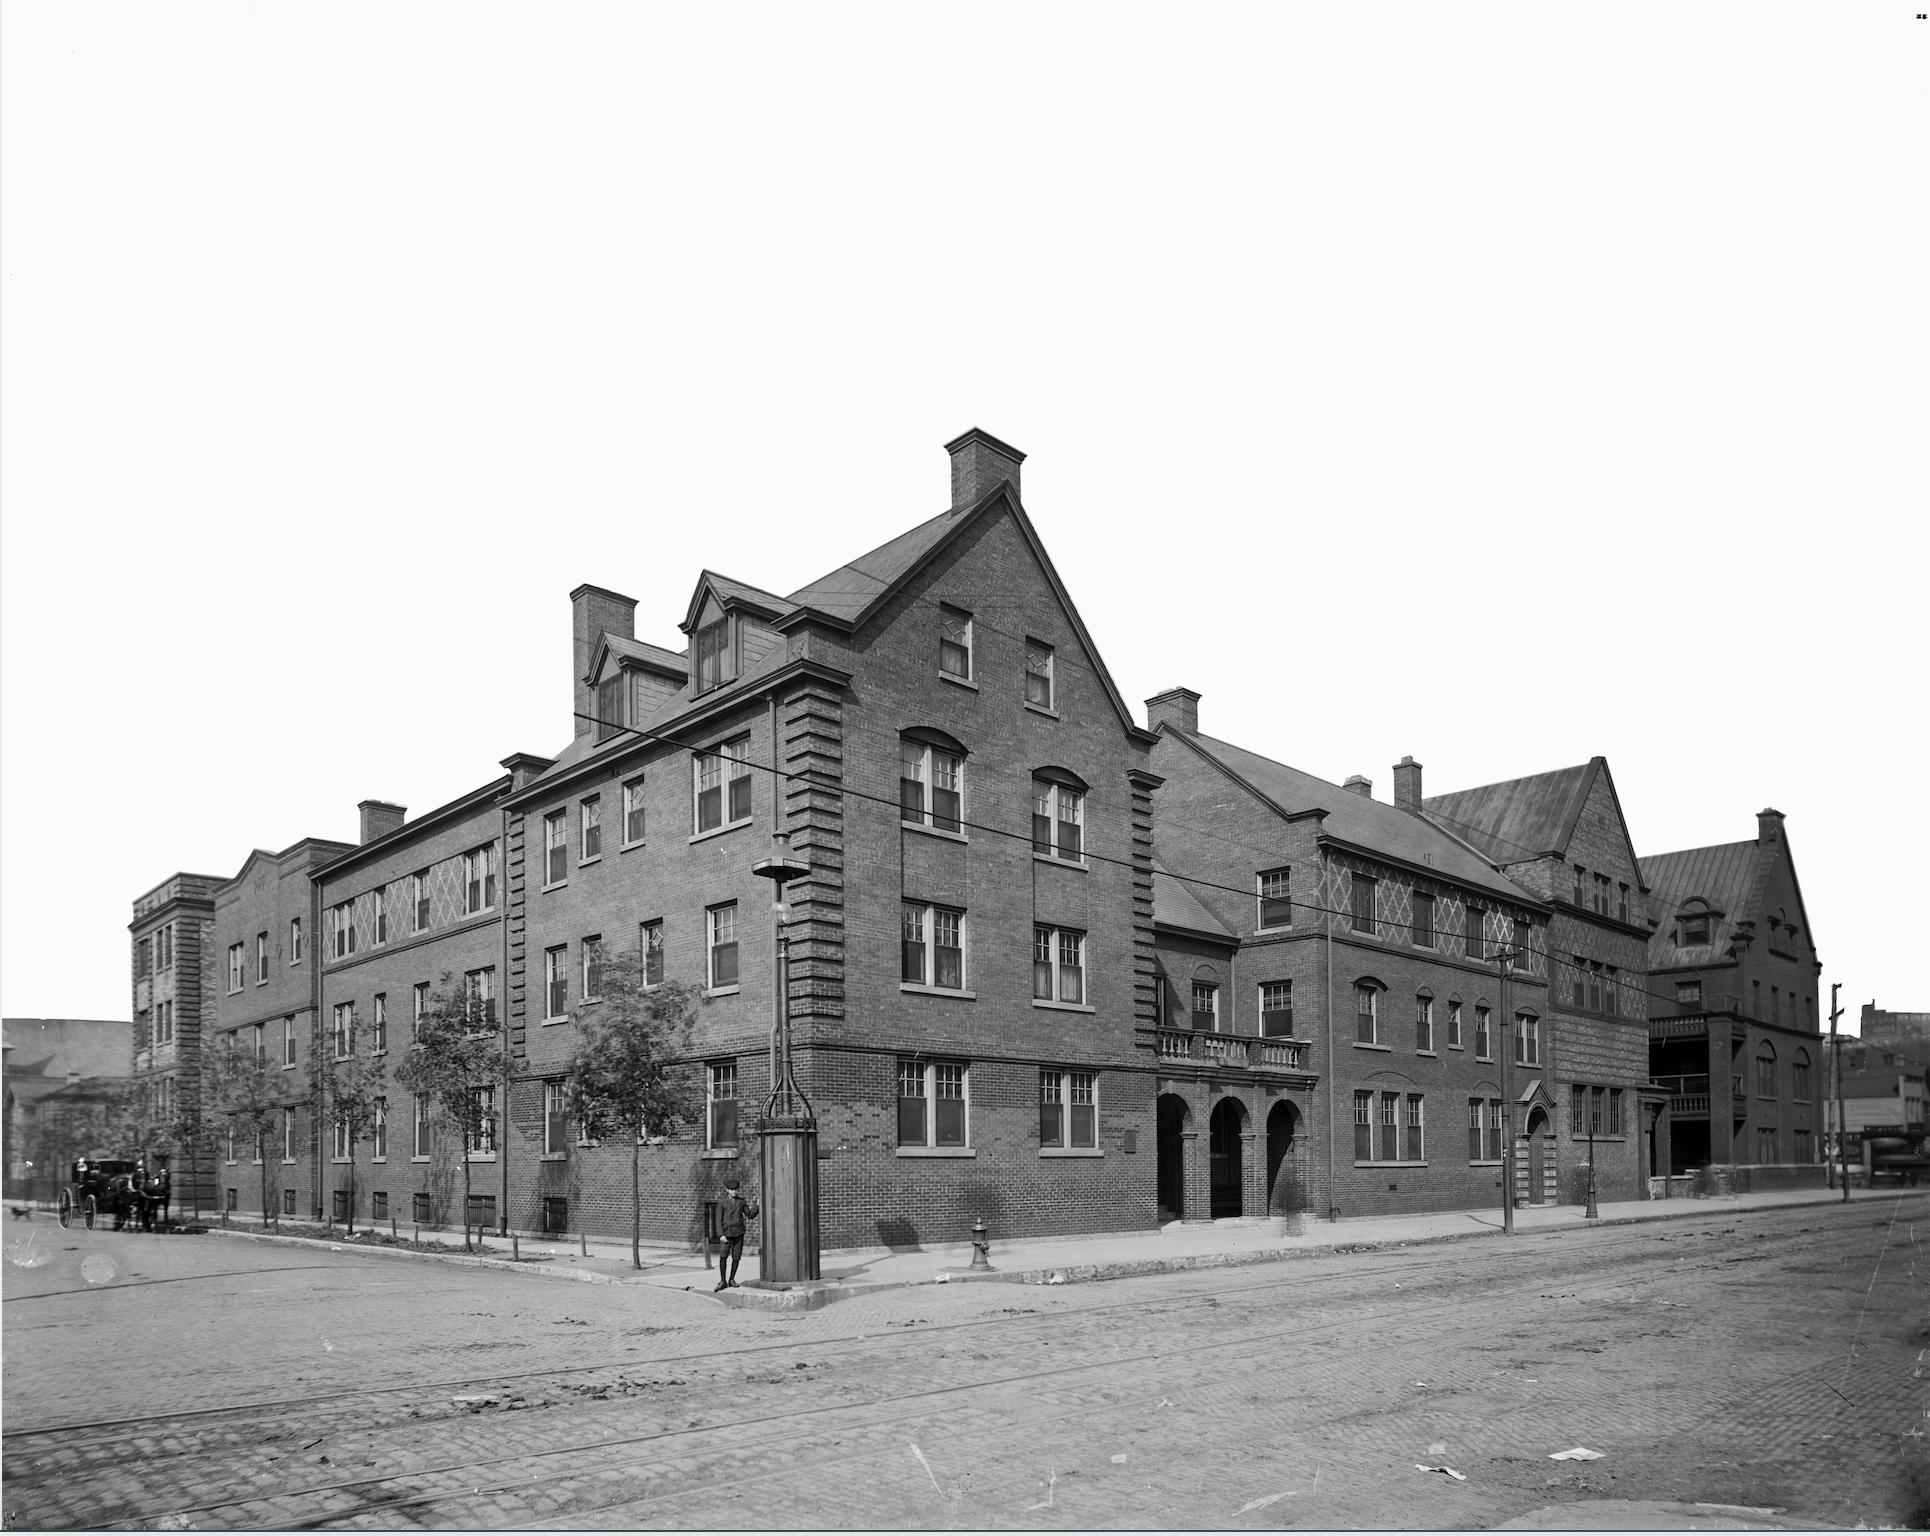 Exterior of Hull House building, c. 1905.